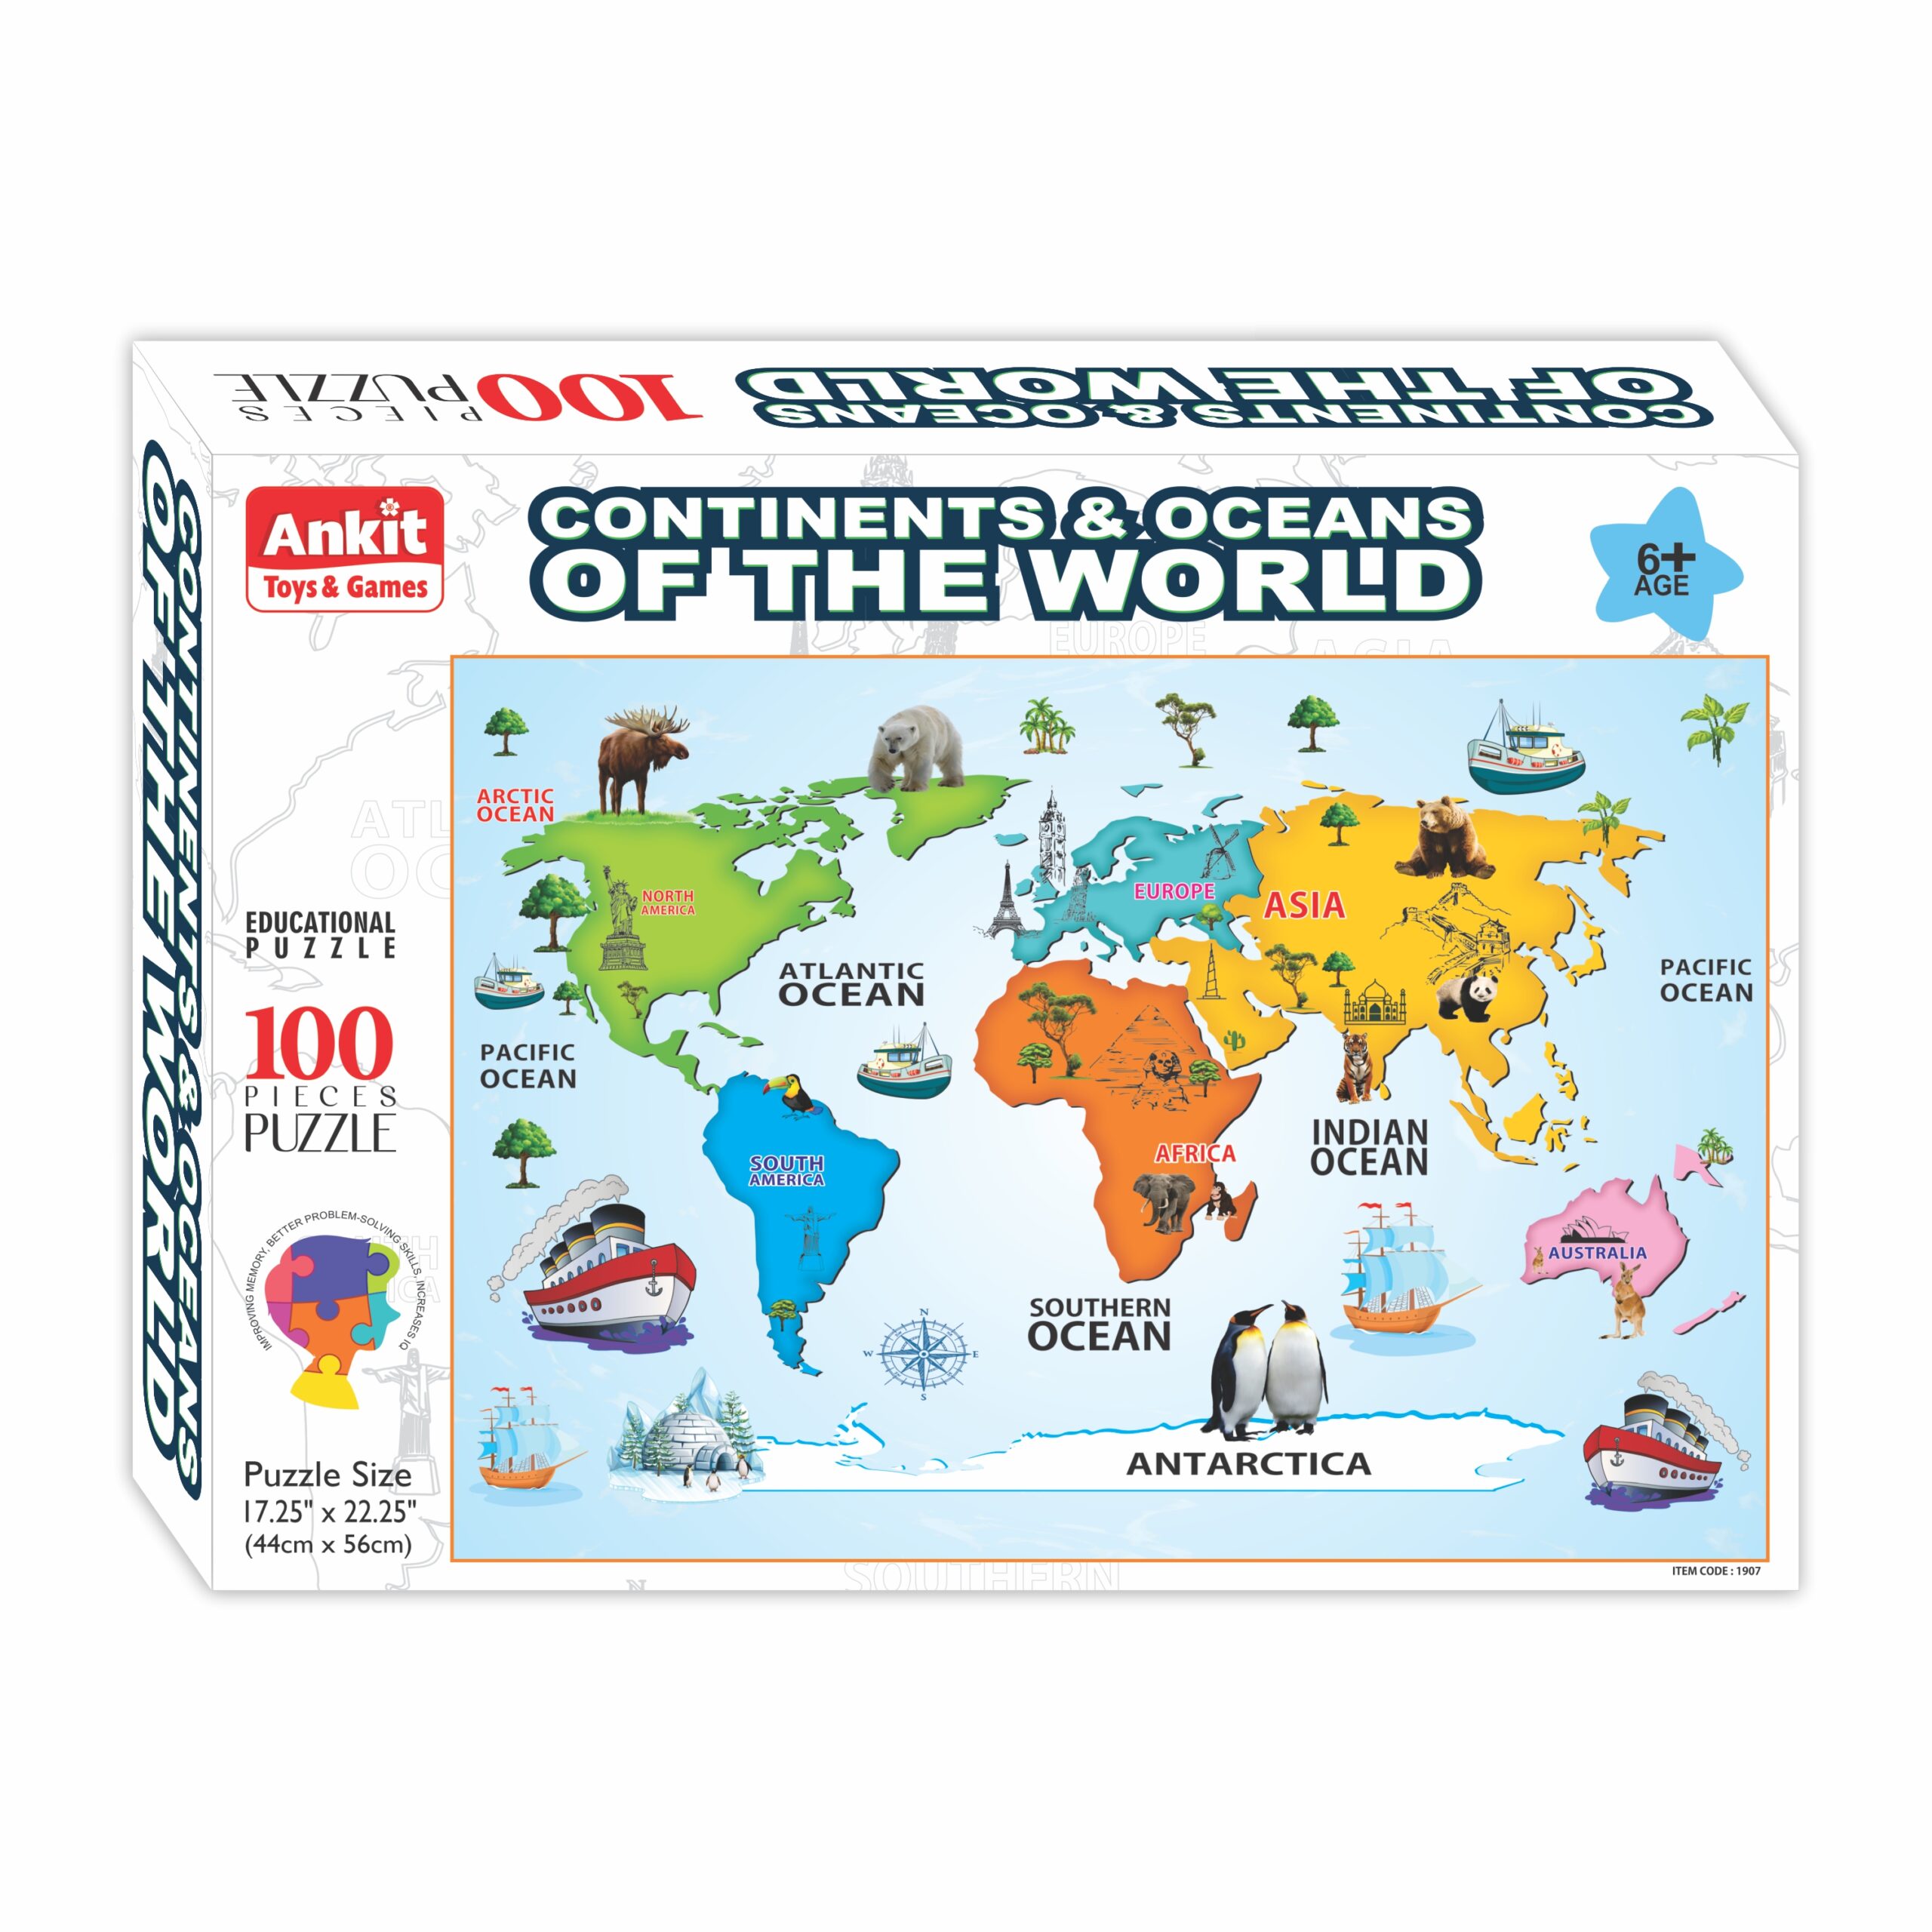 Ankit toys Continents & Oceans of the world